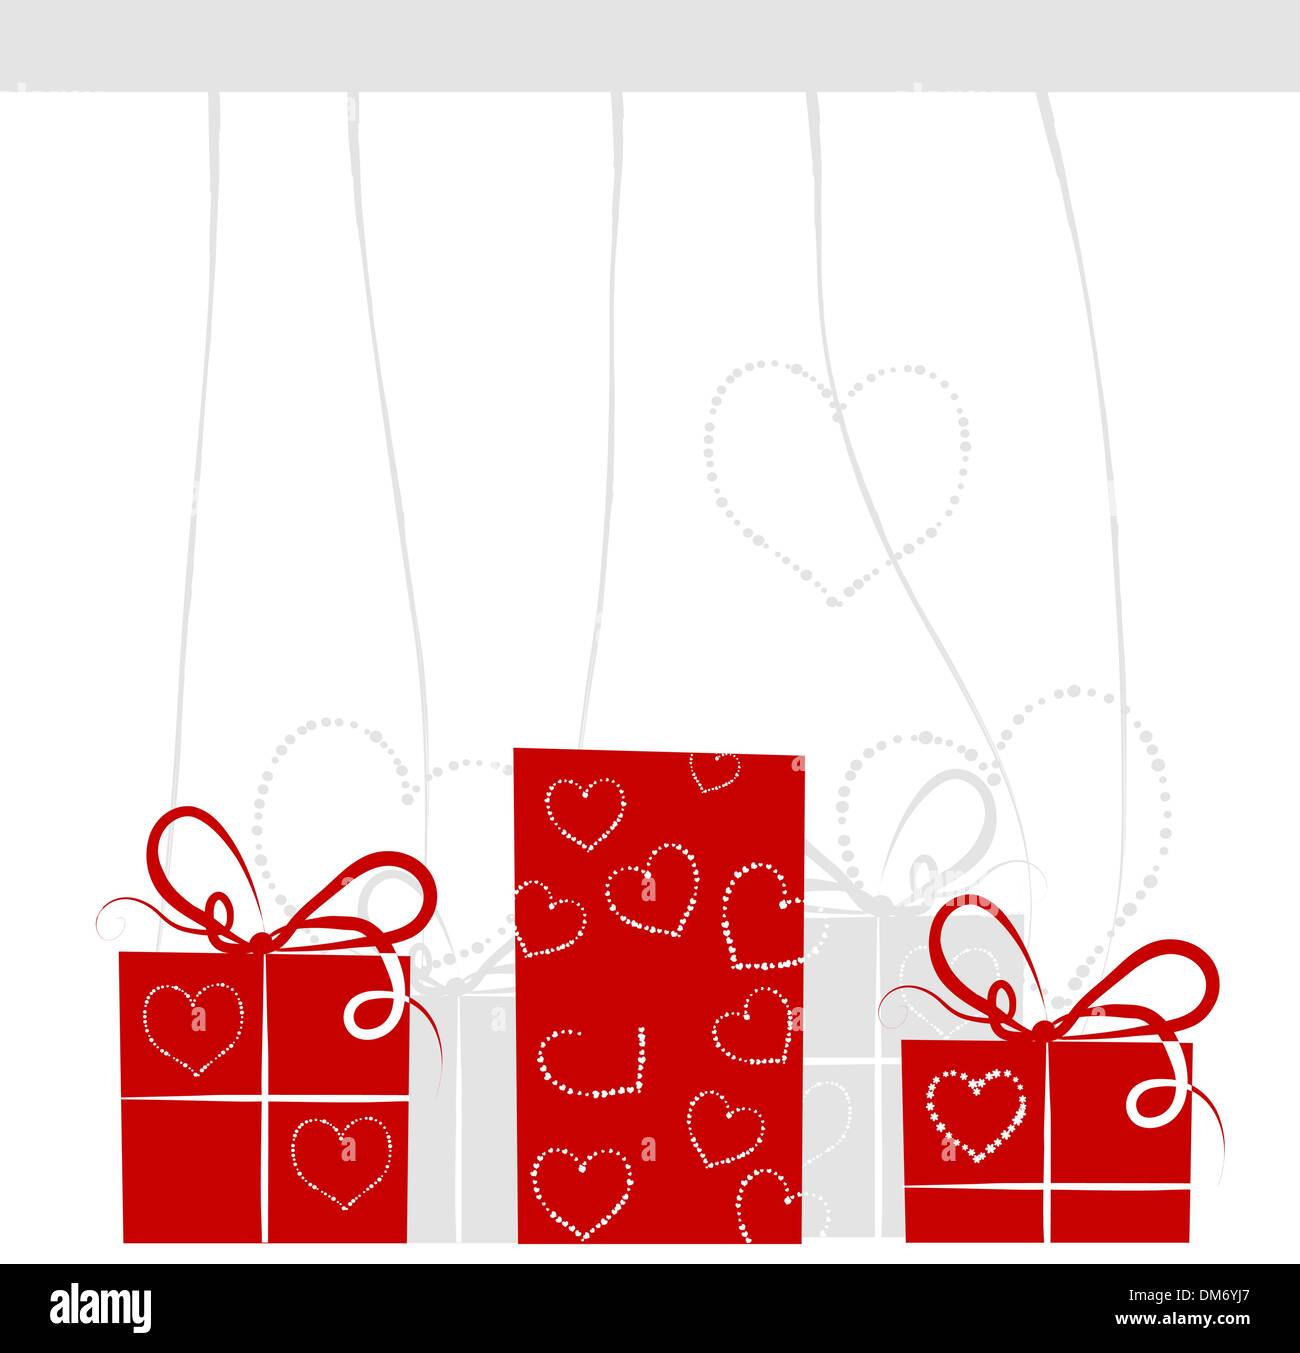 Gift boxes background for your design Stock Vector